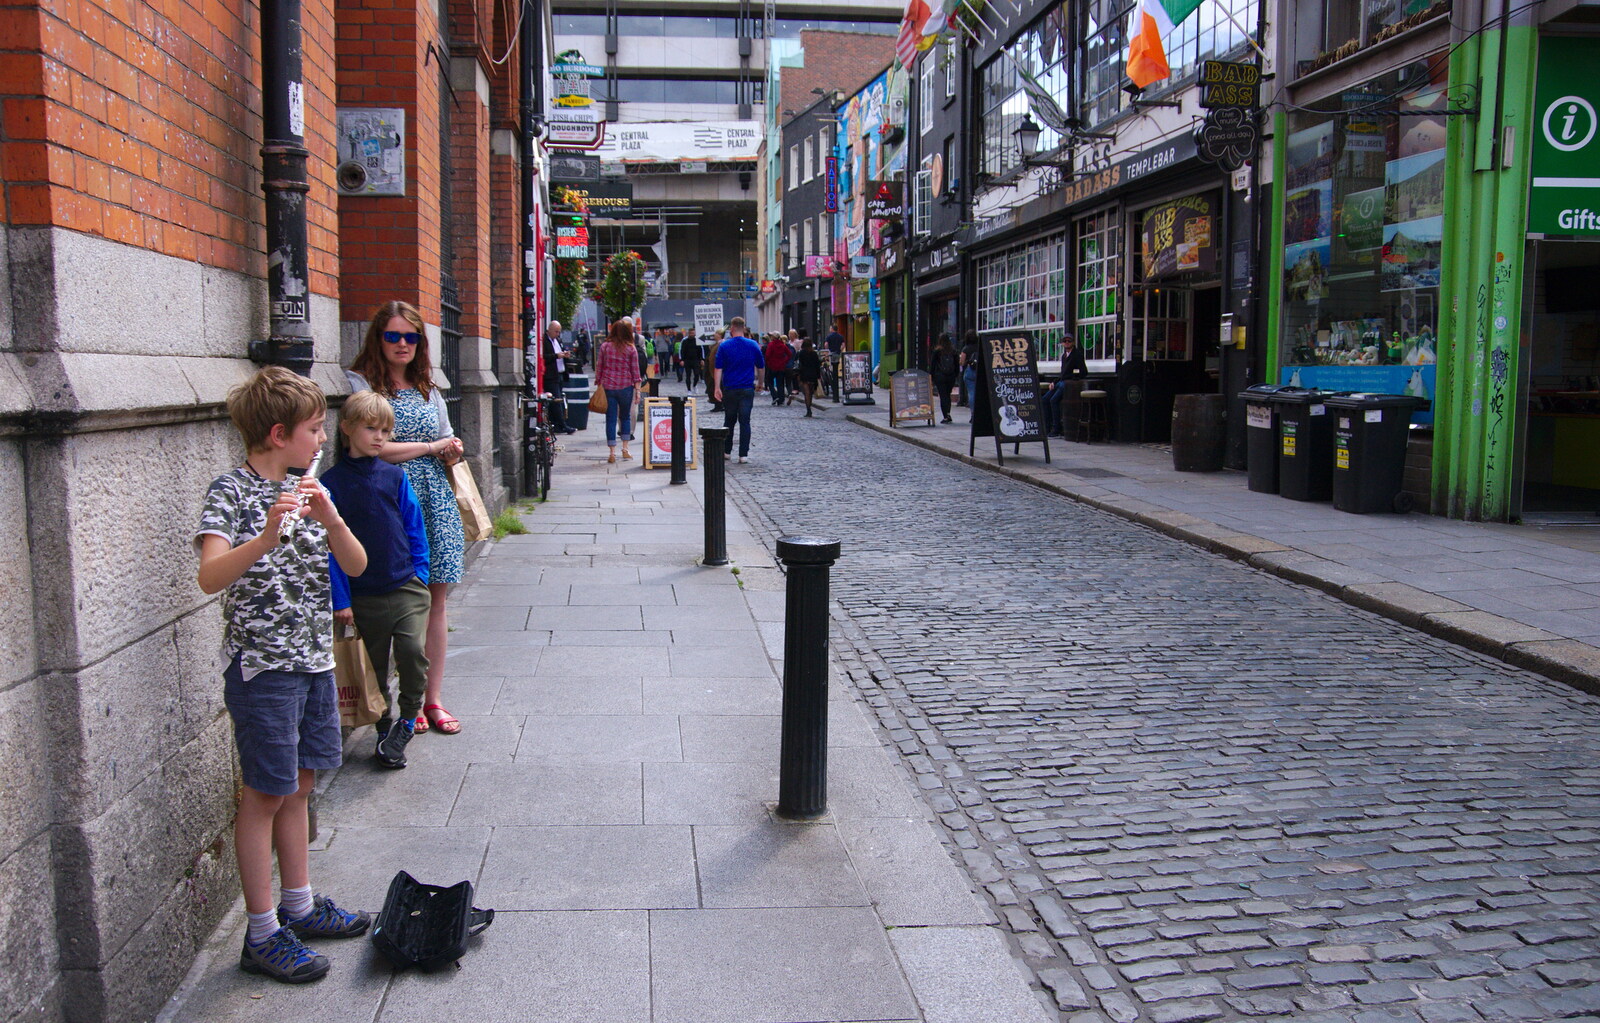 Fred on the flute from Busking in Temple Bar, Dublin, Ireland - 12th August 2019